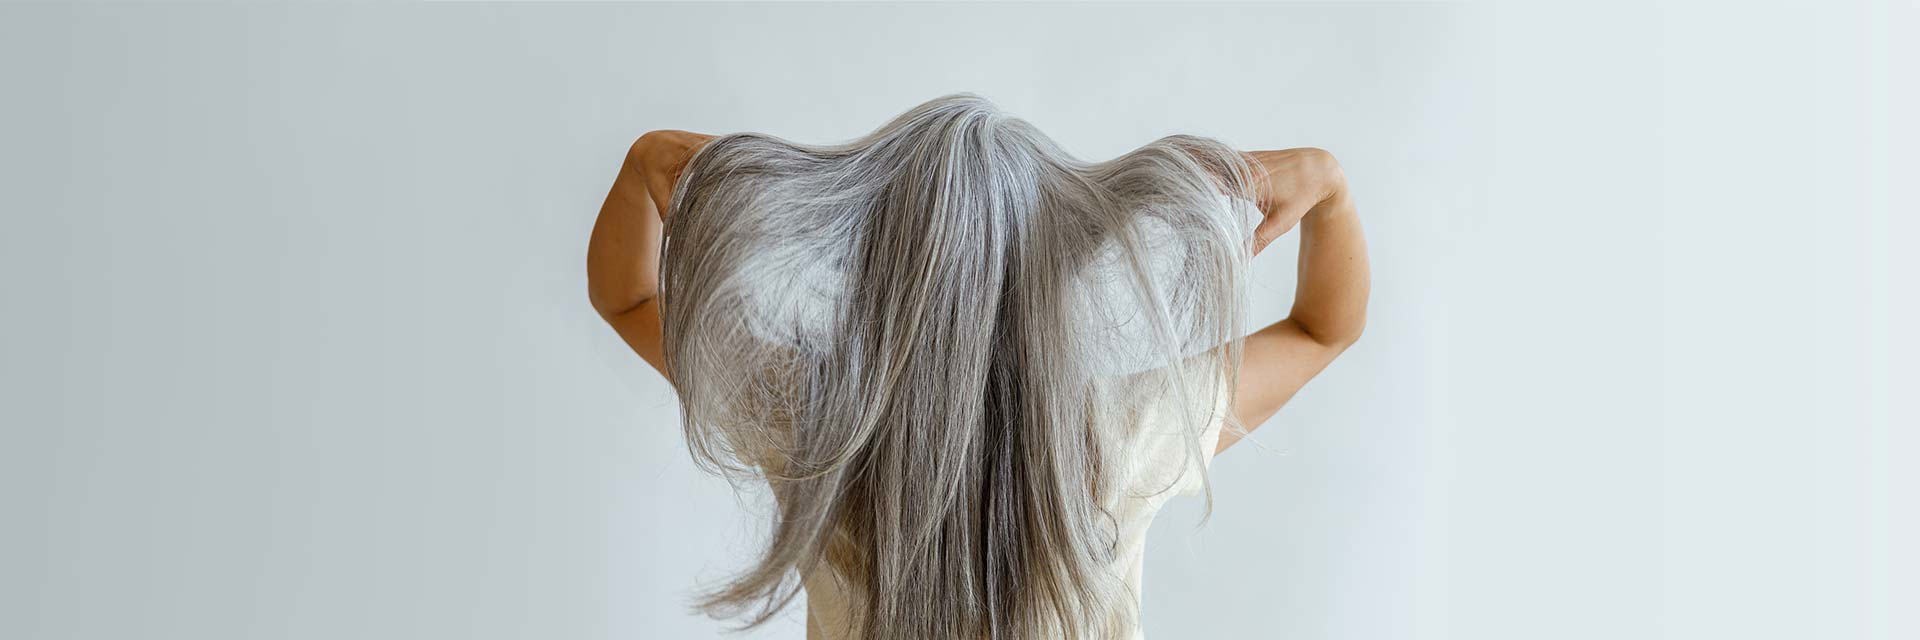 Rear view of woman with long grey hair